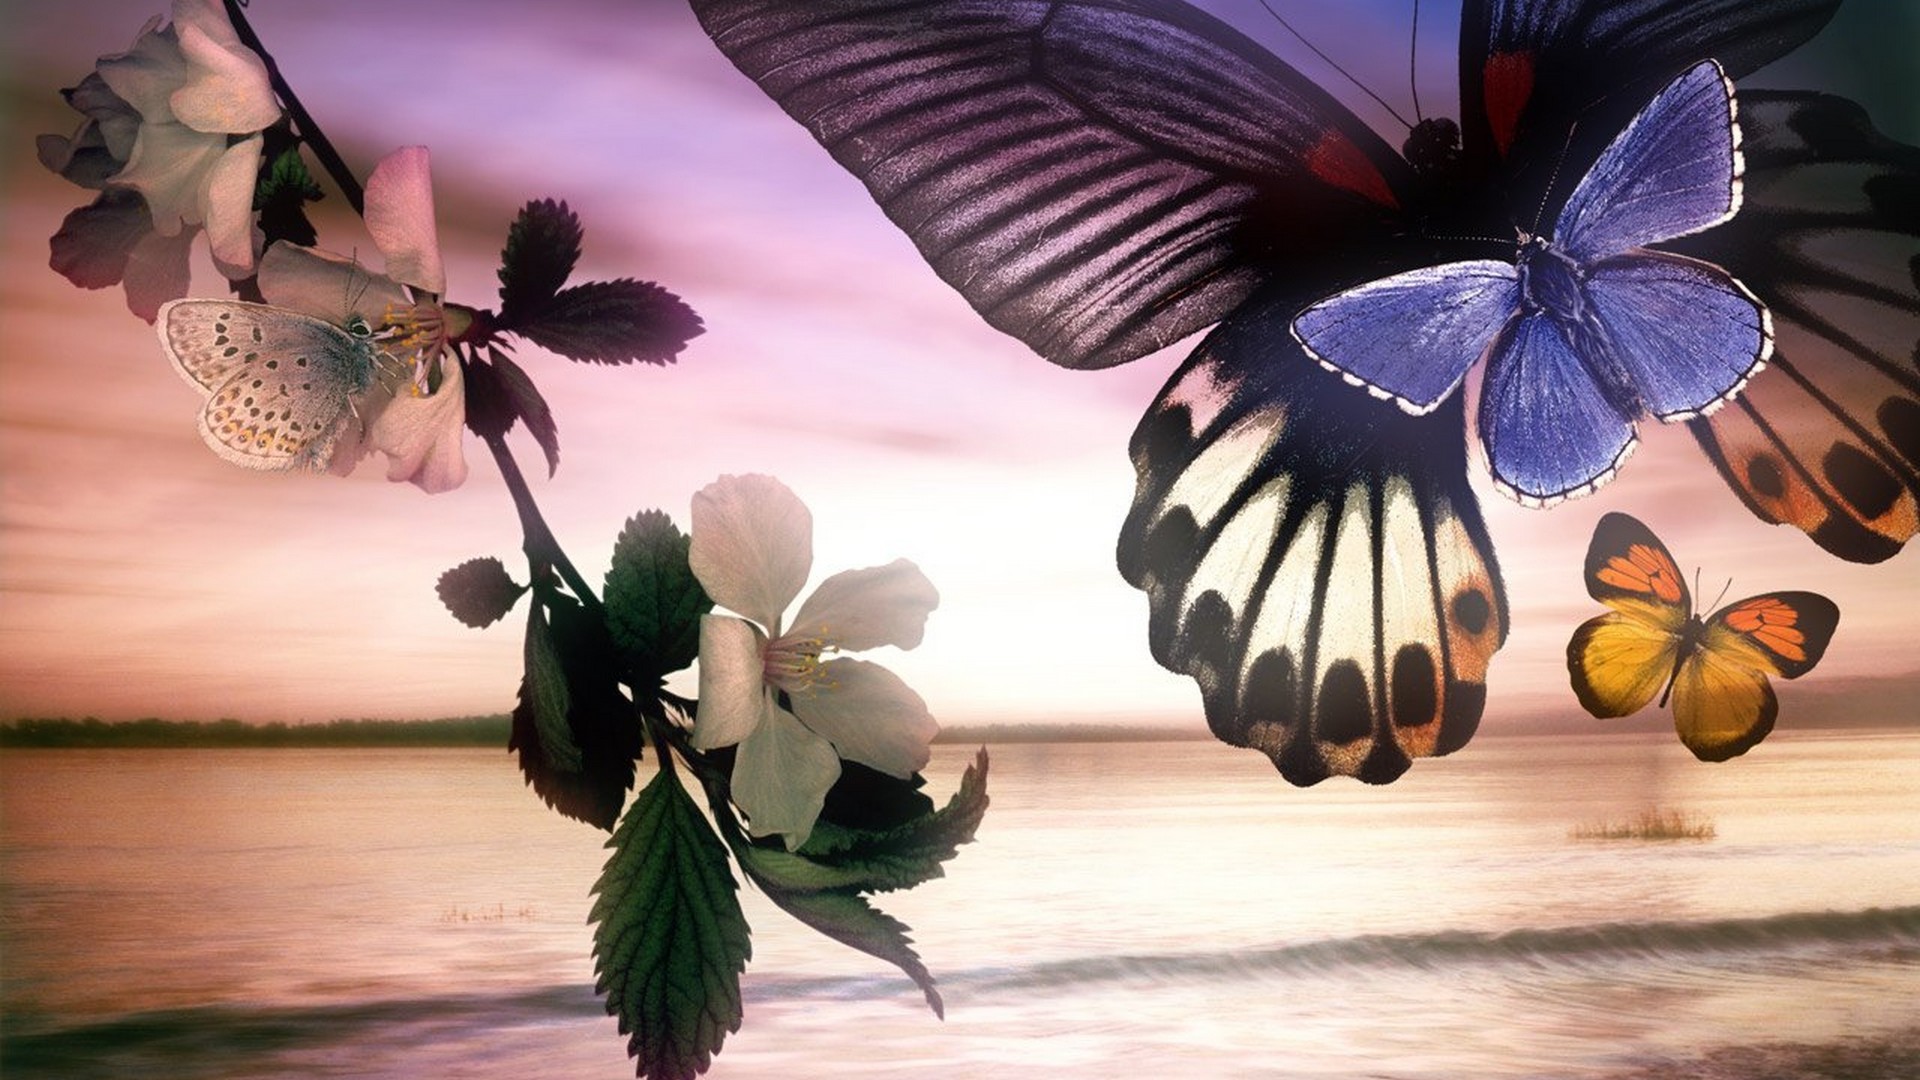 Butterfly Pictures Wallpaper HD With Resolution 1920X1080